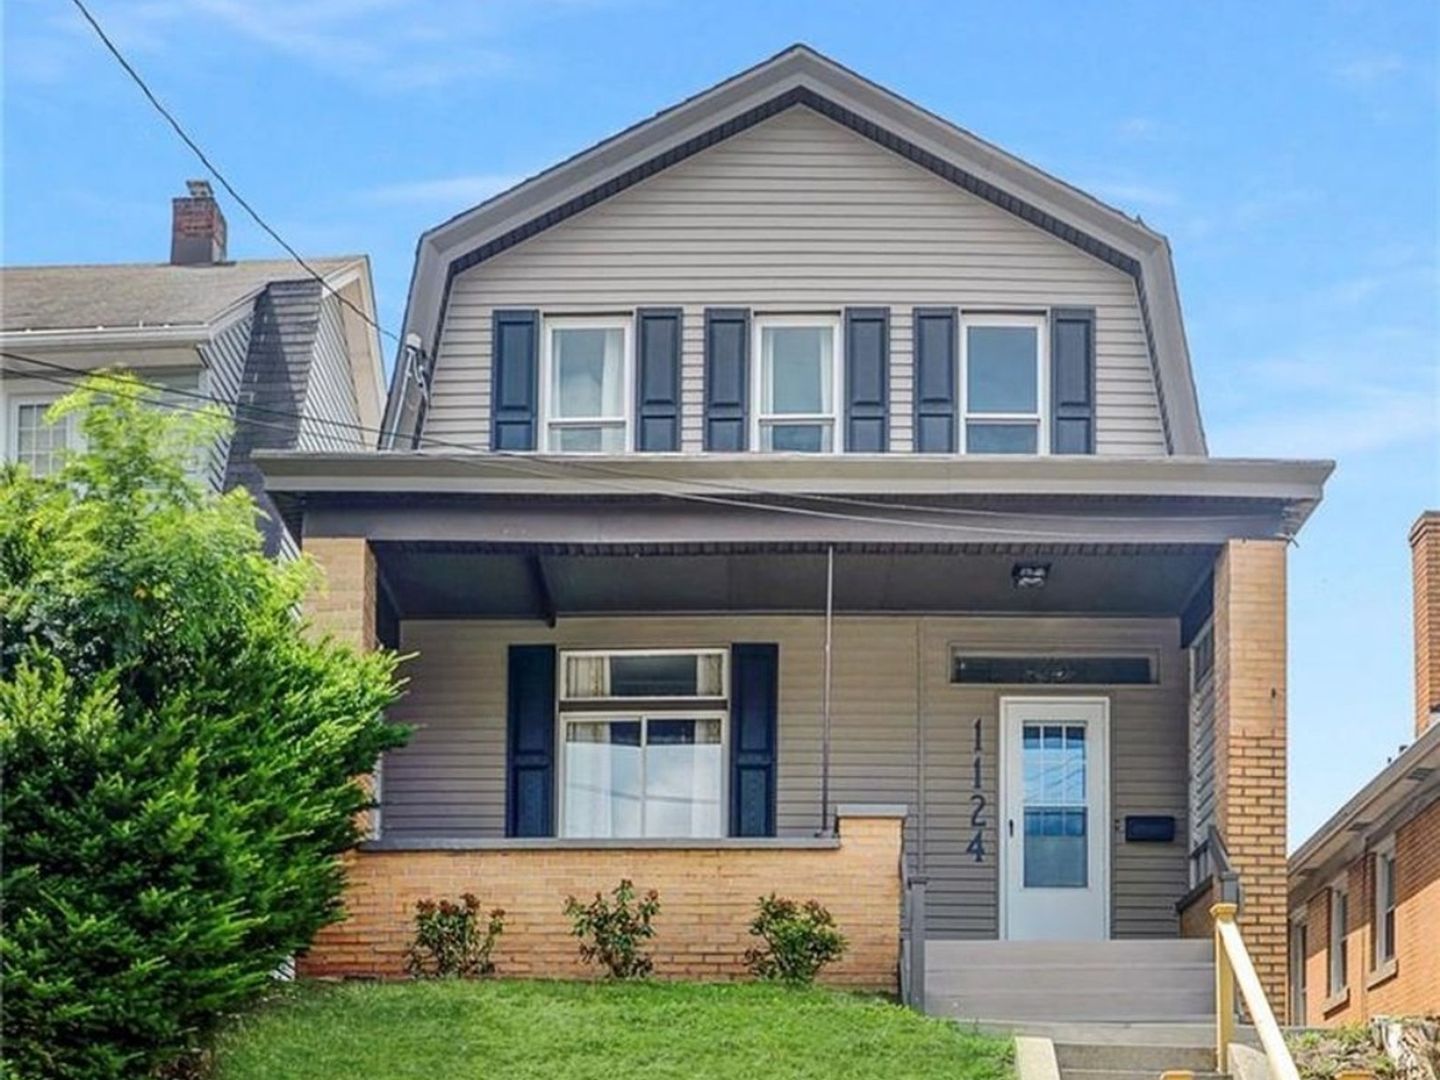 3 Bedroom Single Family Home in Pittsburgh